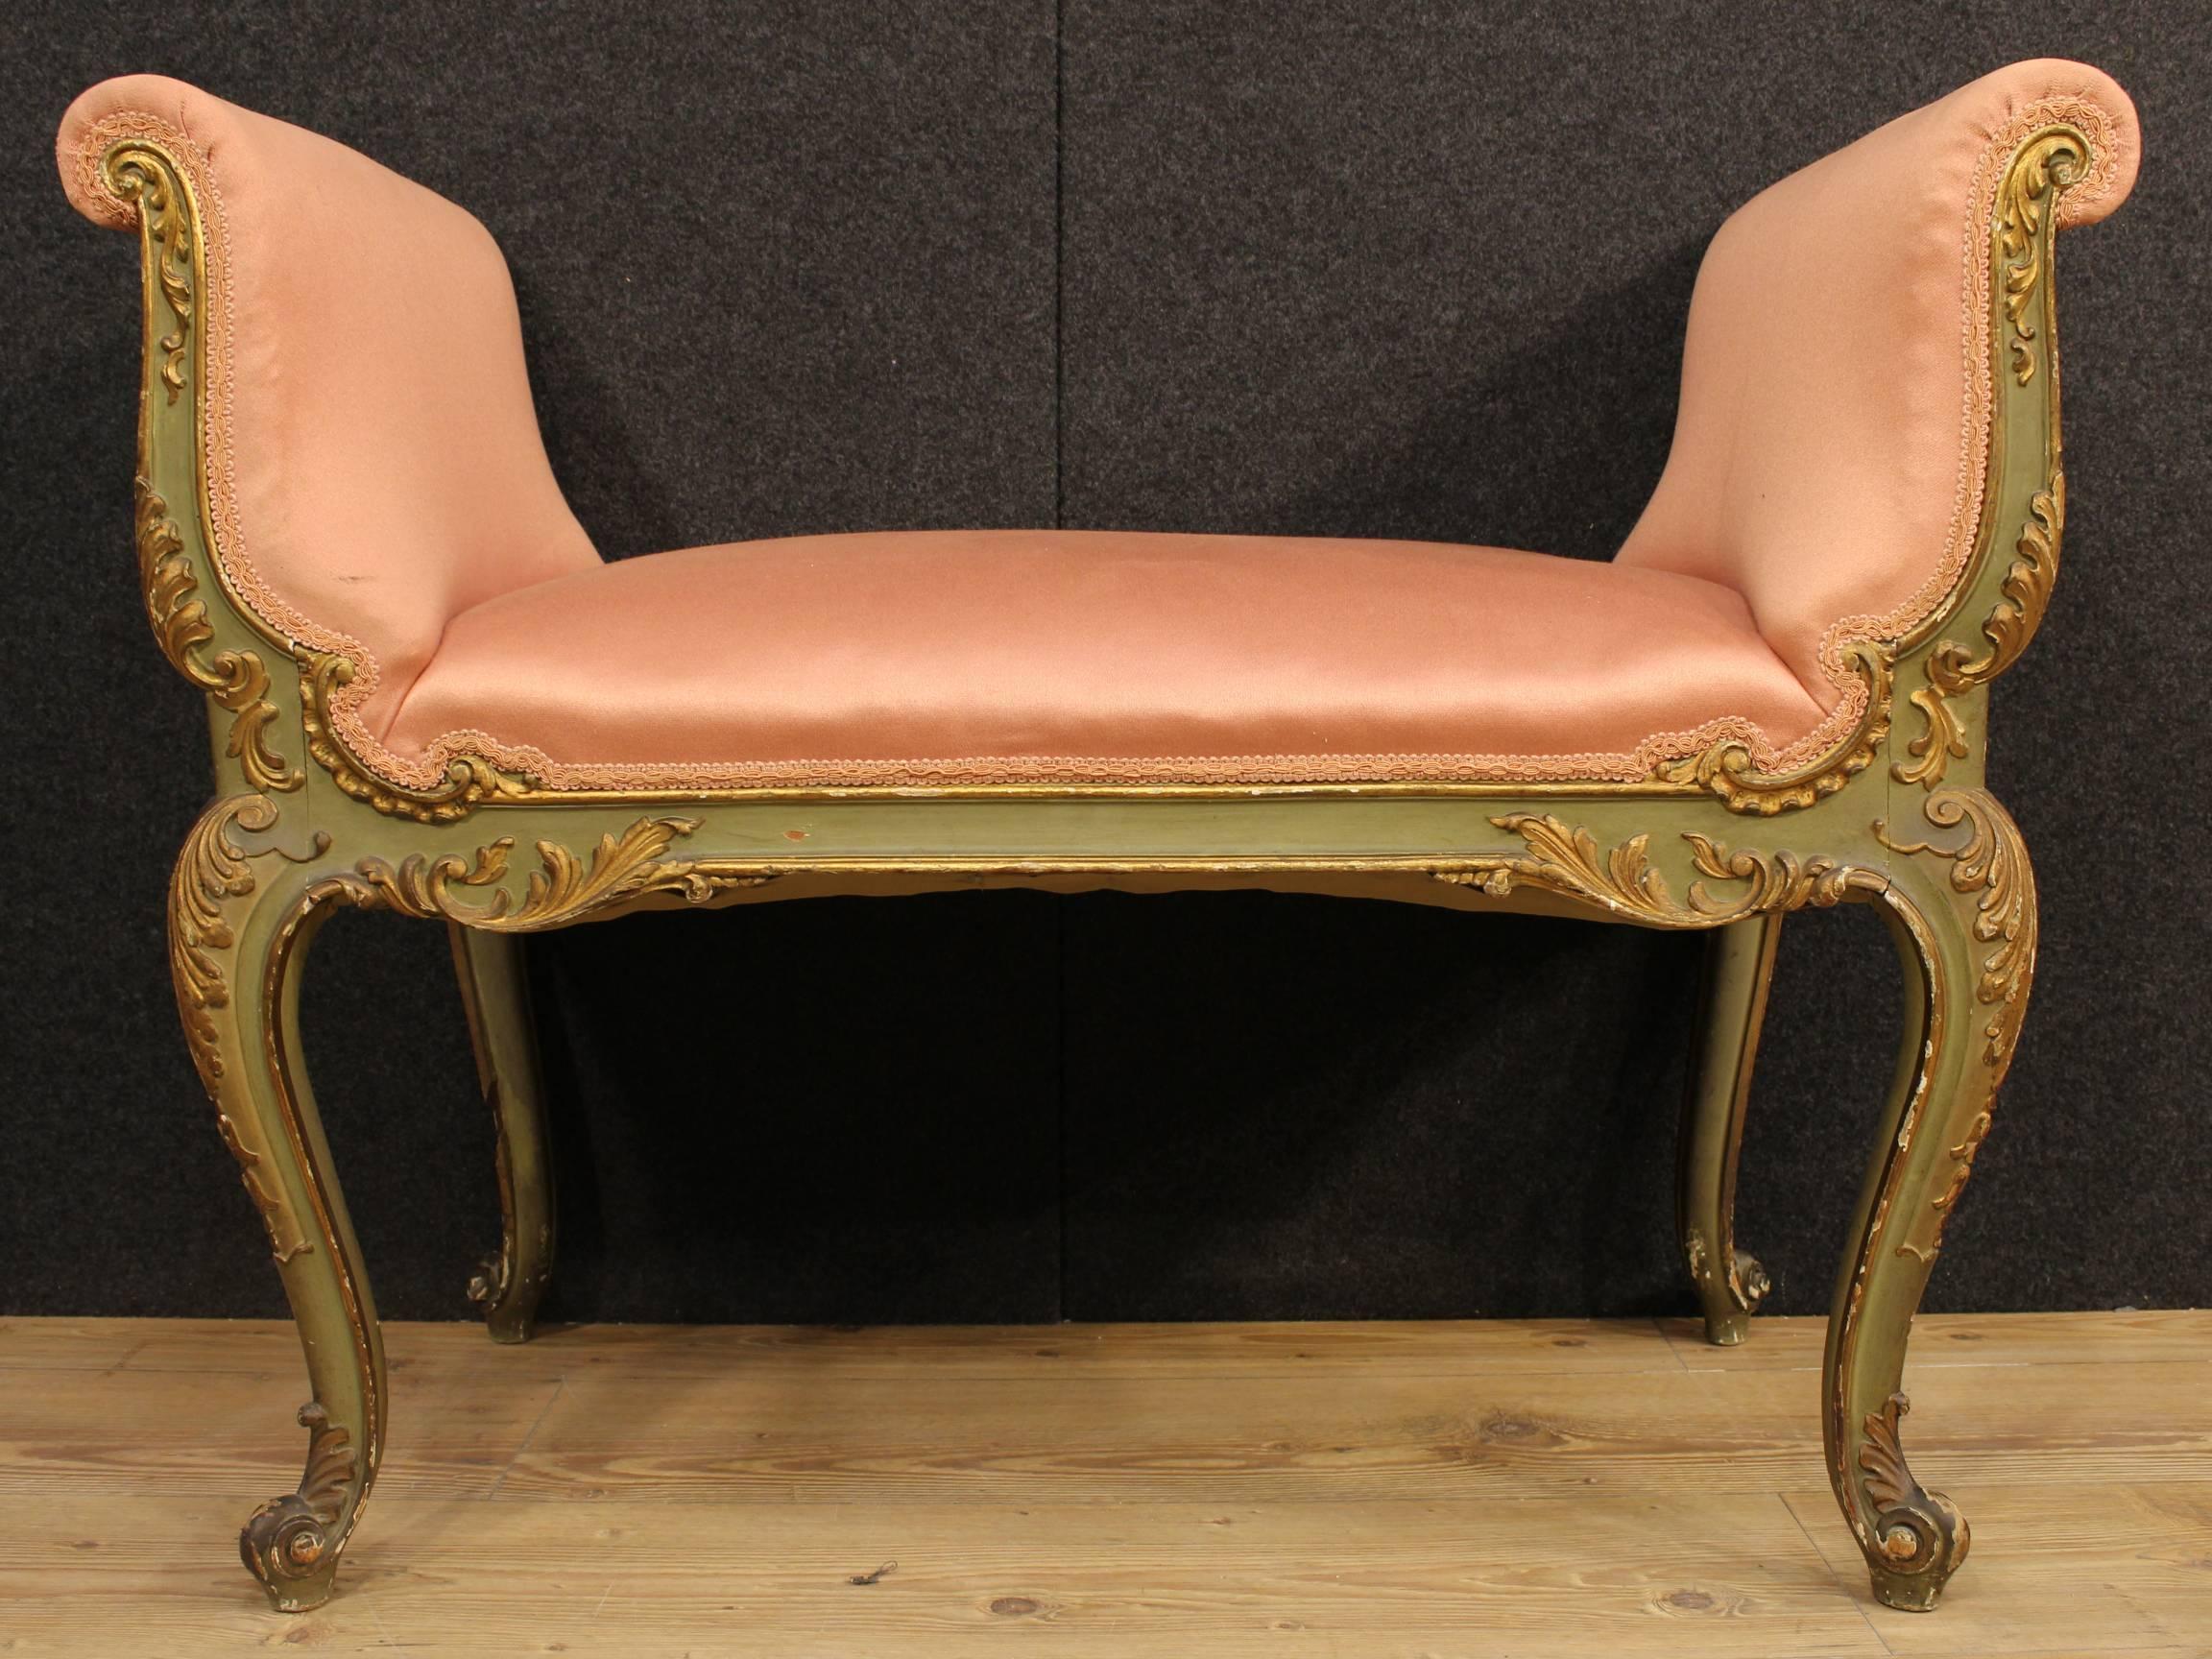 Fabric 20th Century Venetian Lacquered and Gilt Bench